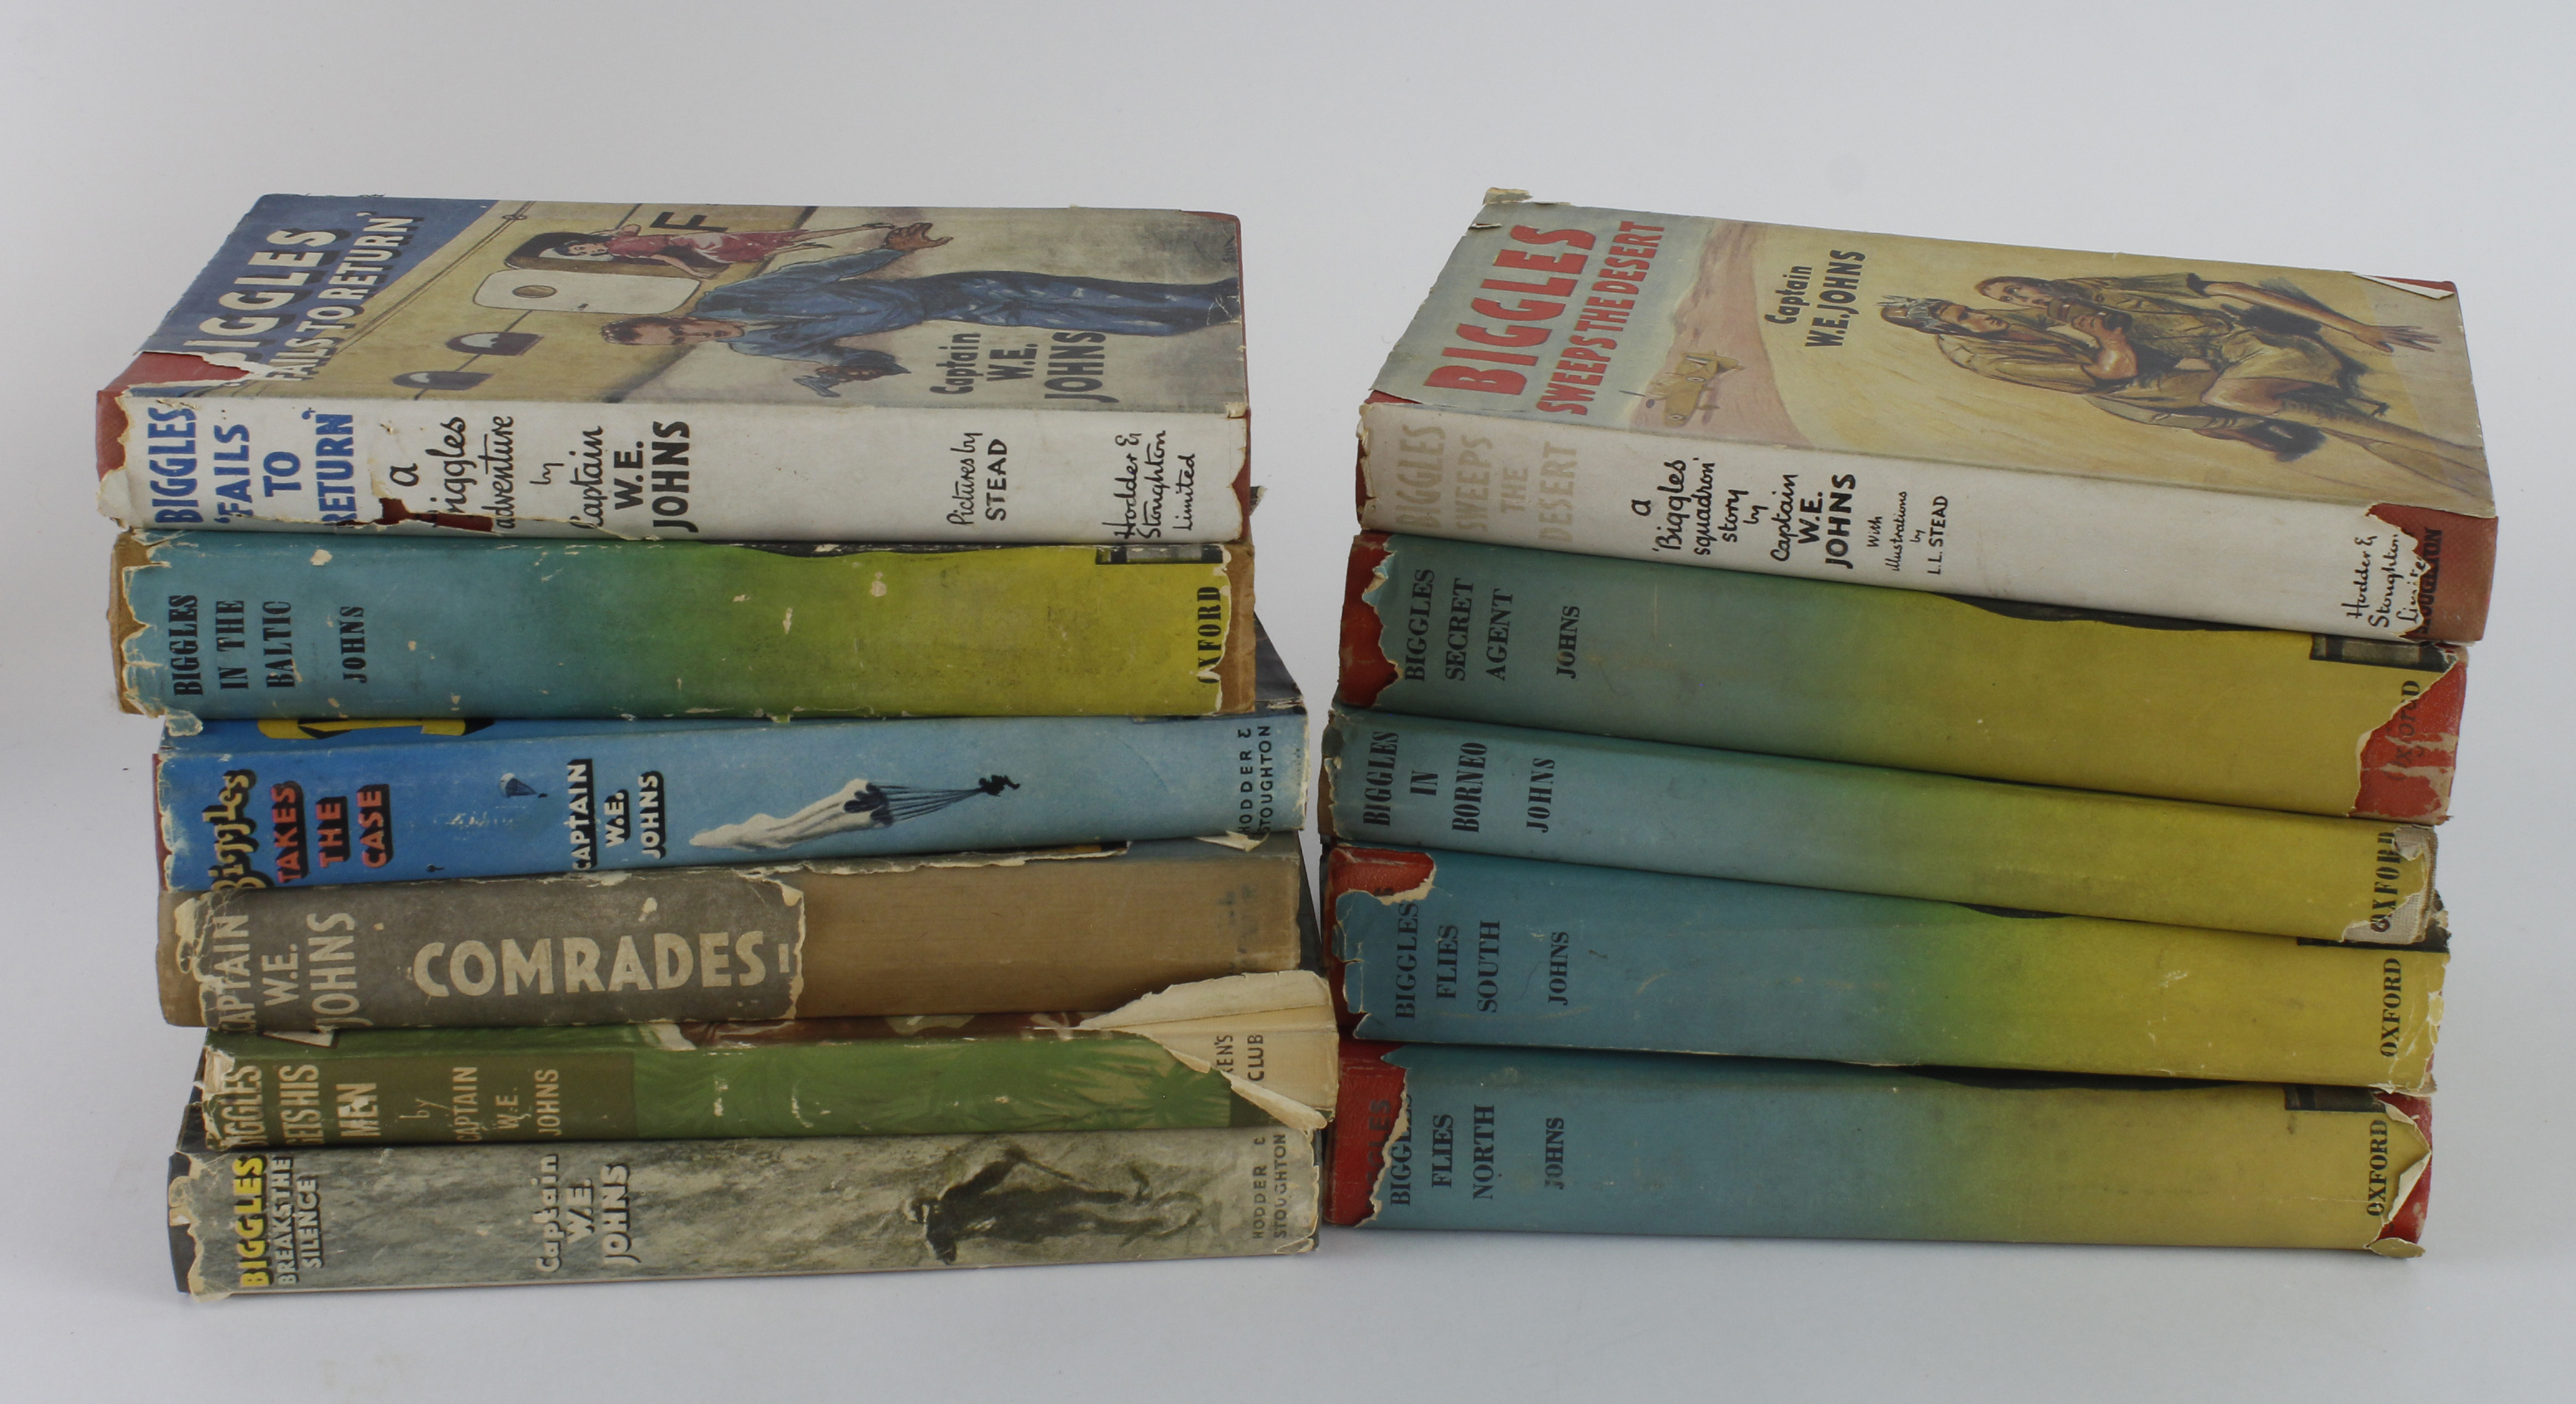 Johns (Captain W. E.). A collection of eleven Biggles books, mostly later editions, all original